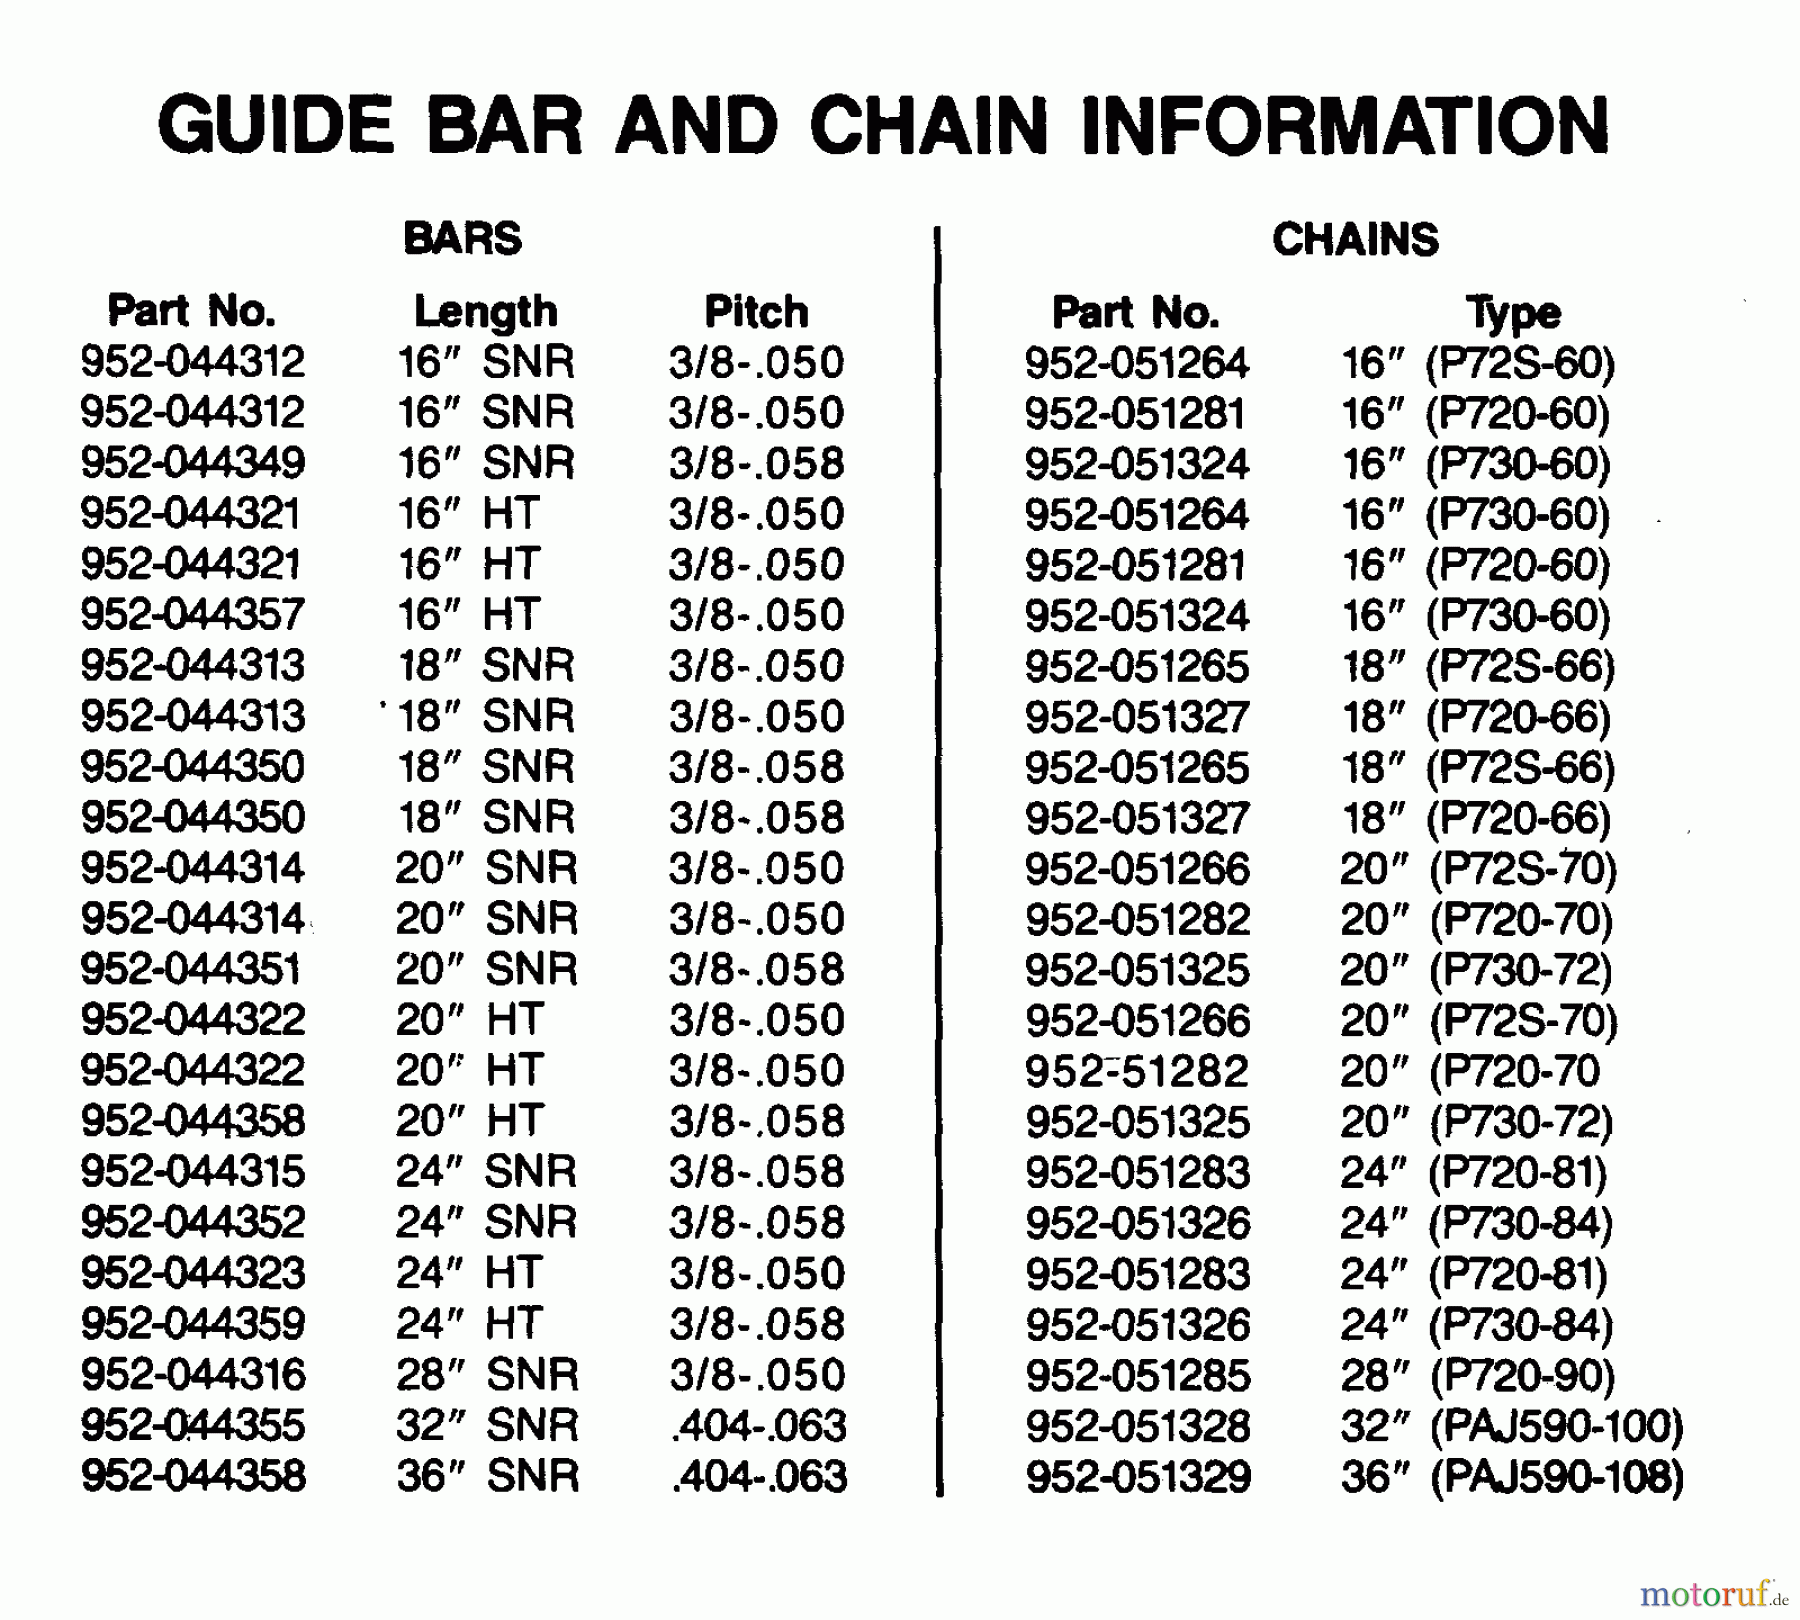  Poulan / Weed Eater Motorsägen PP525 - Poulan Pro Chainsaw GUIDE BAR AND CHAIN INFORMATION